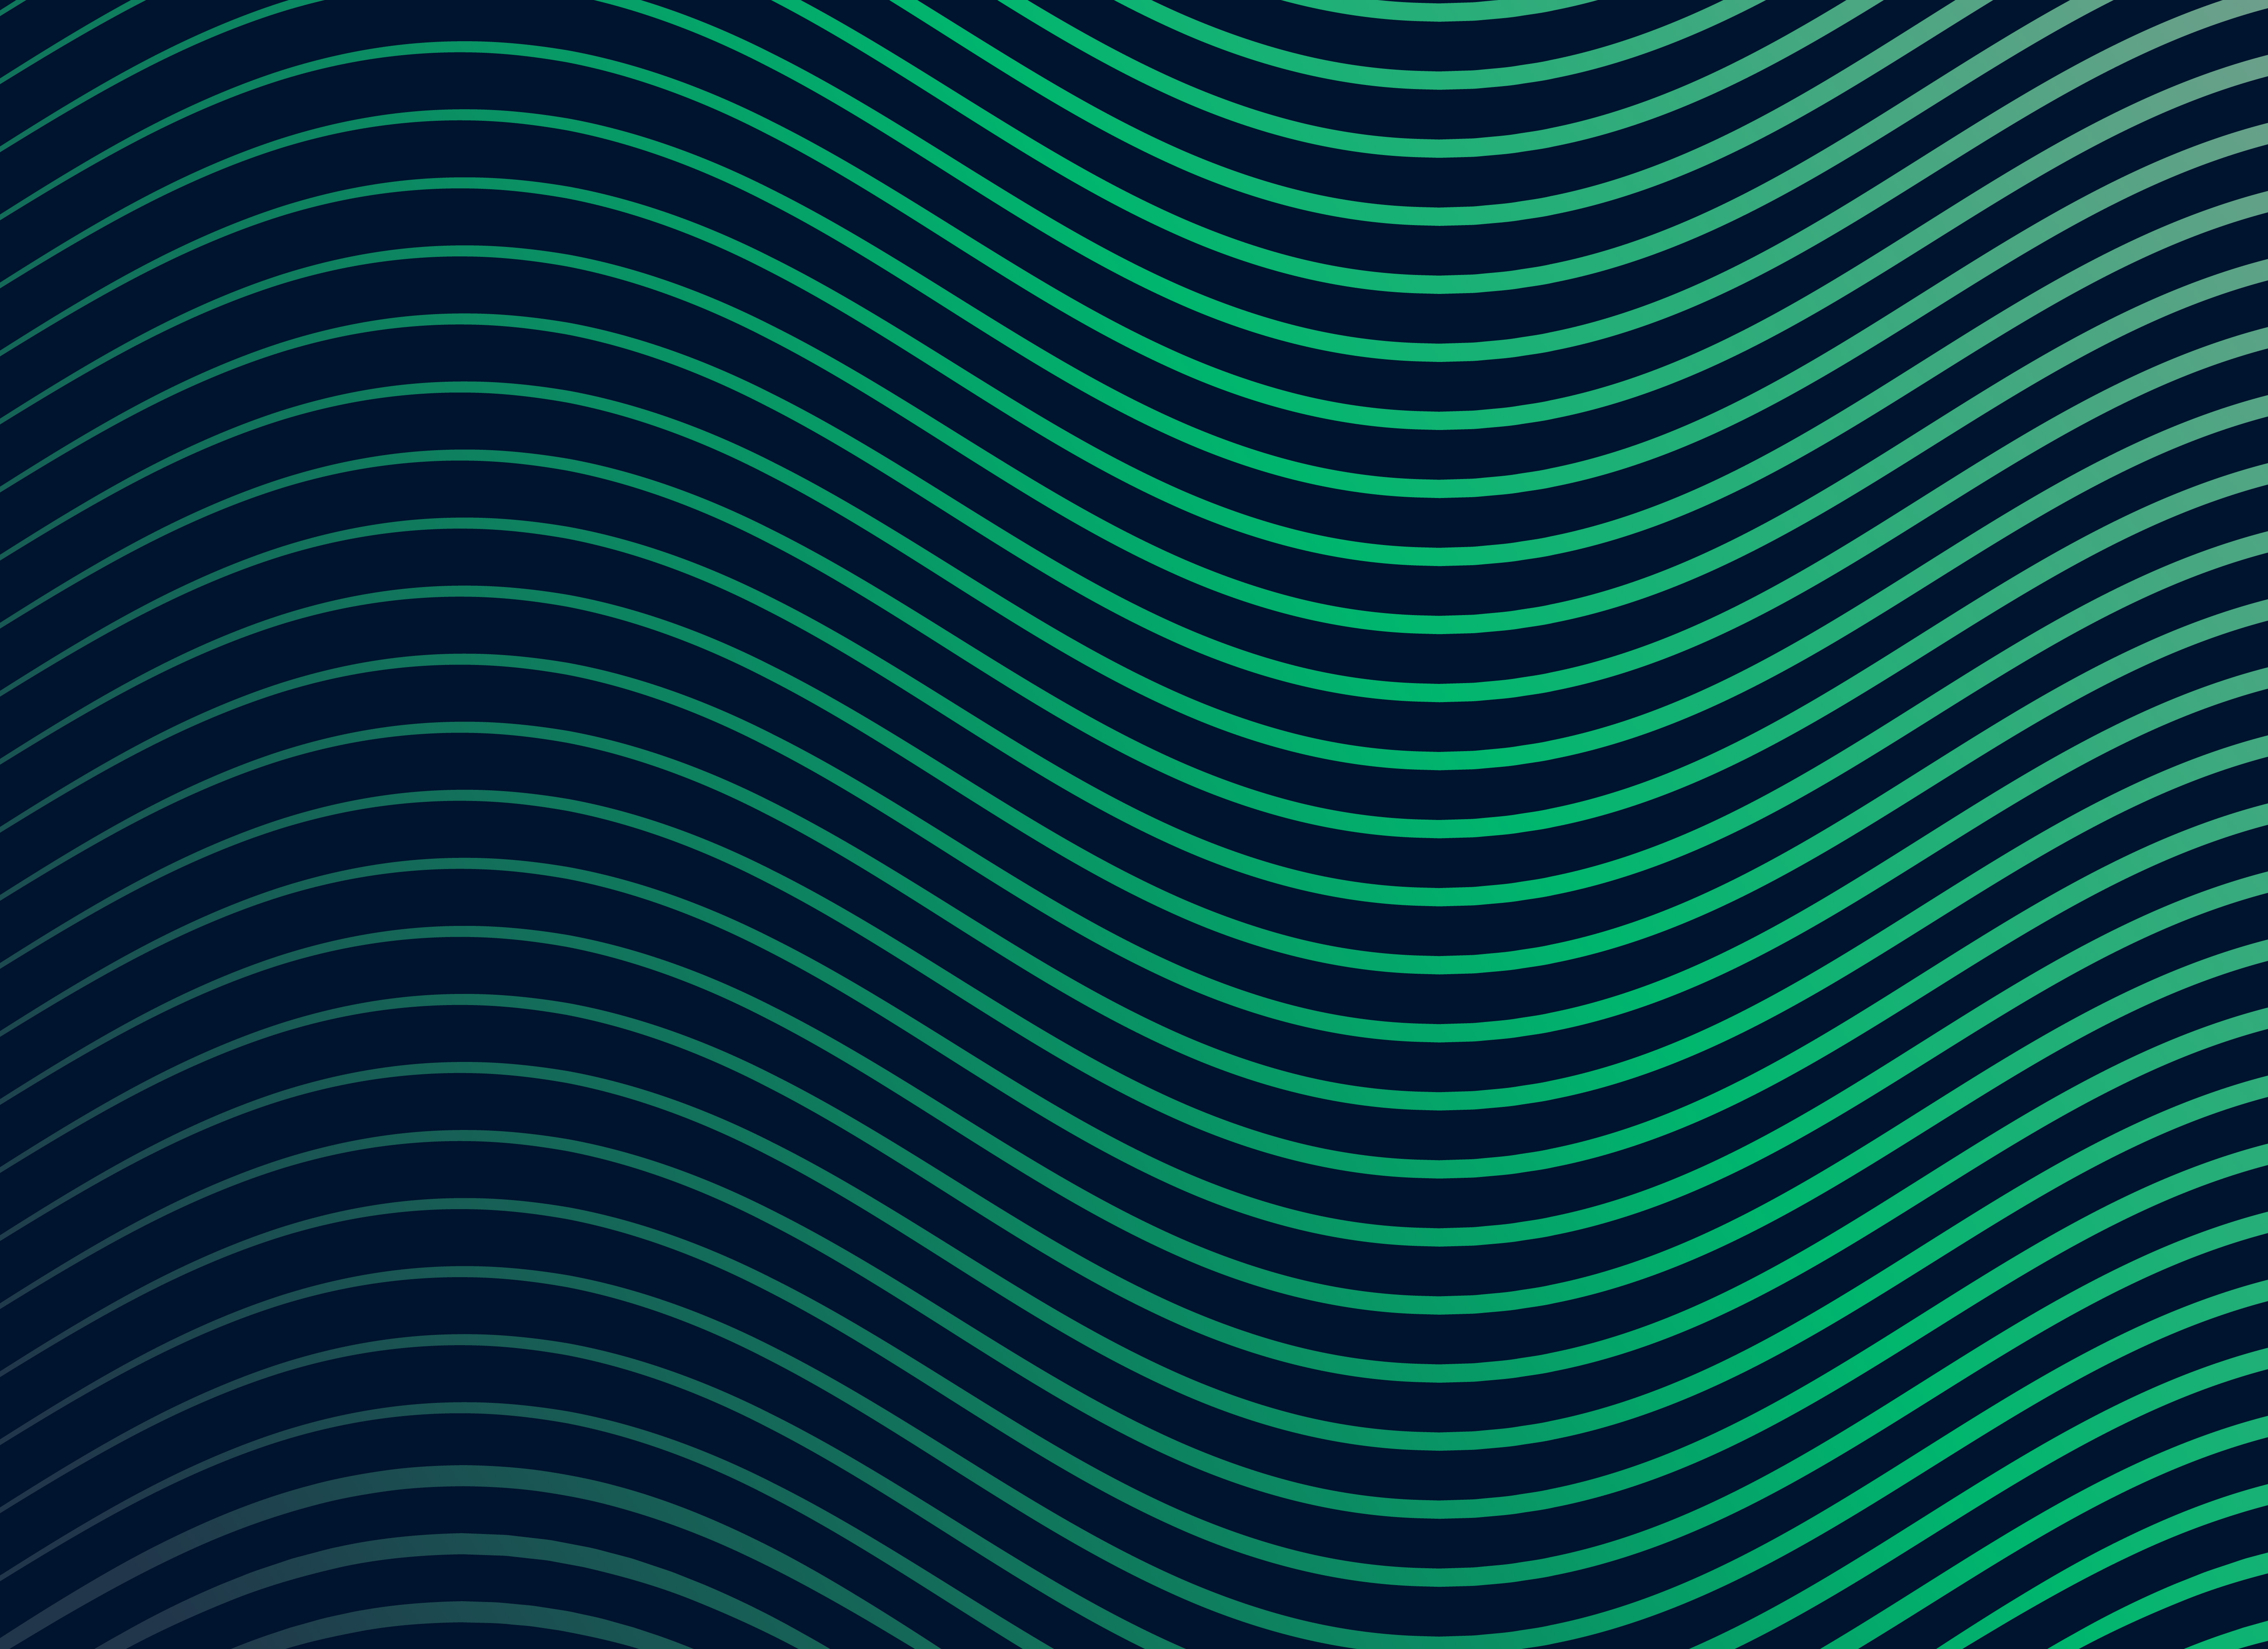 smooth sine wave pattern background - Download Free Vector Art, Stock